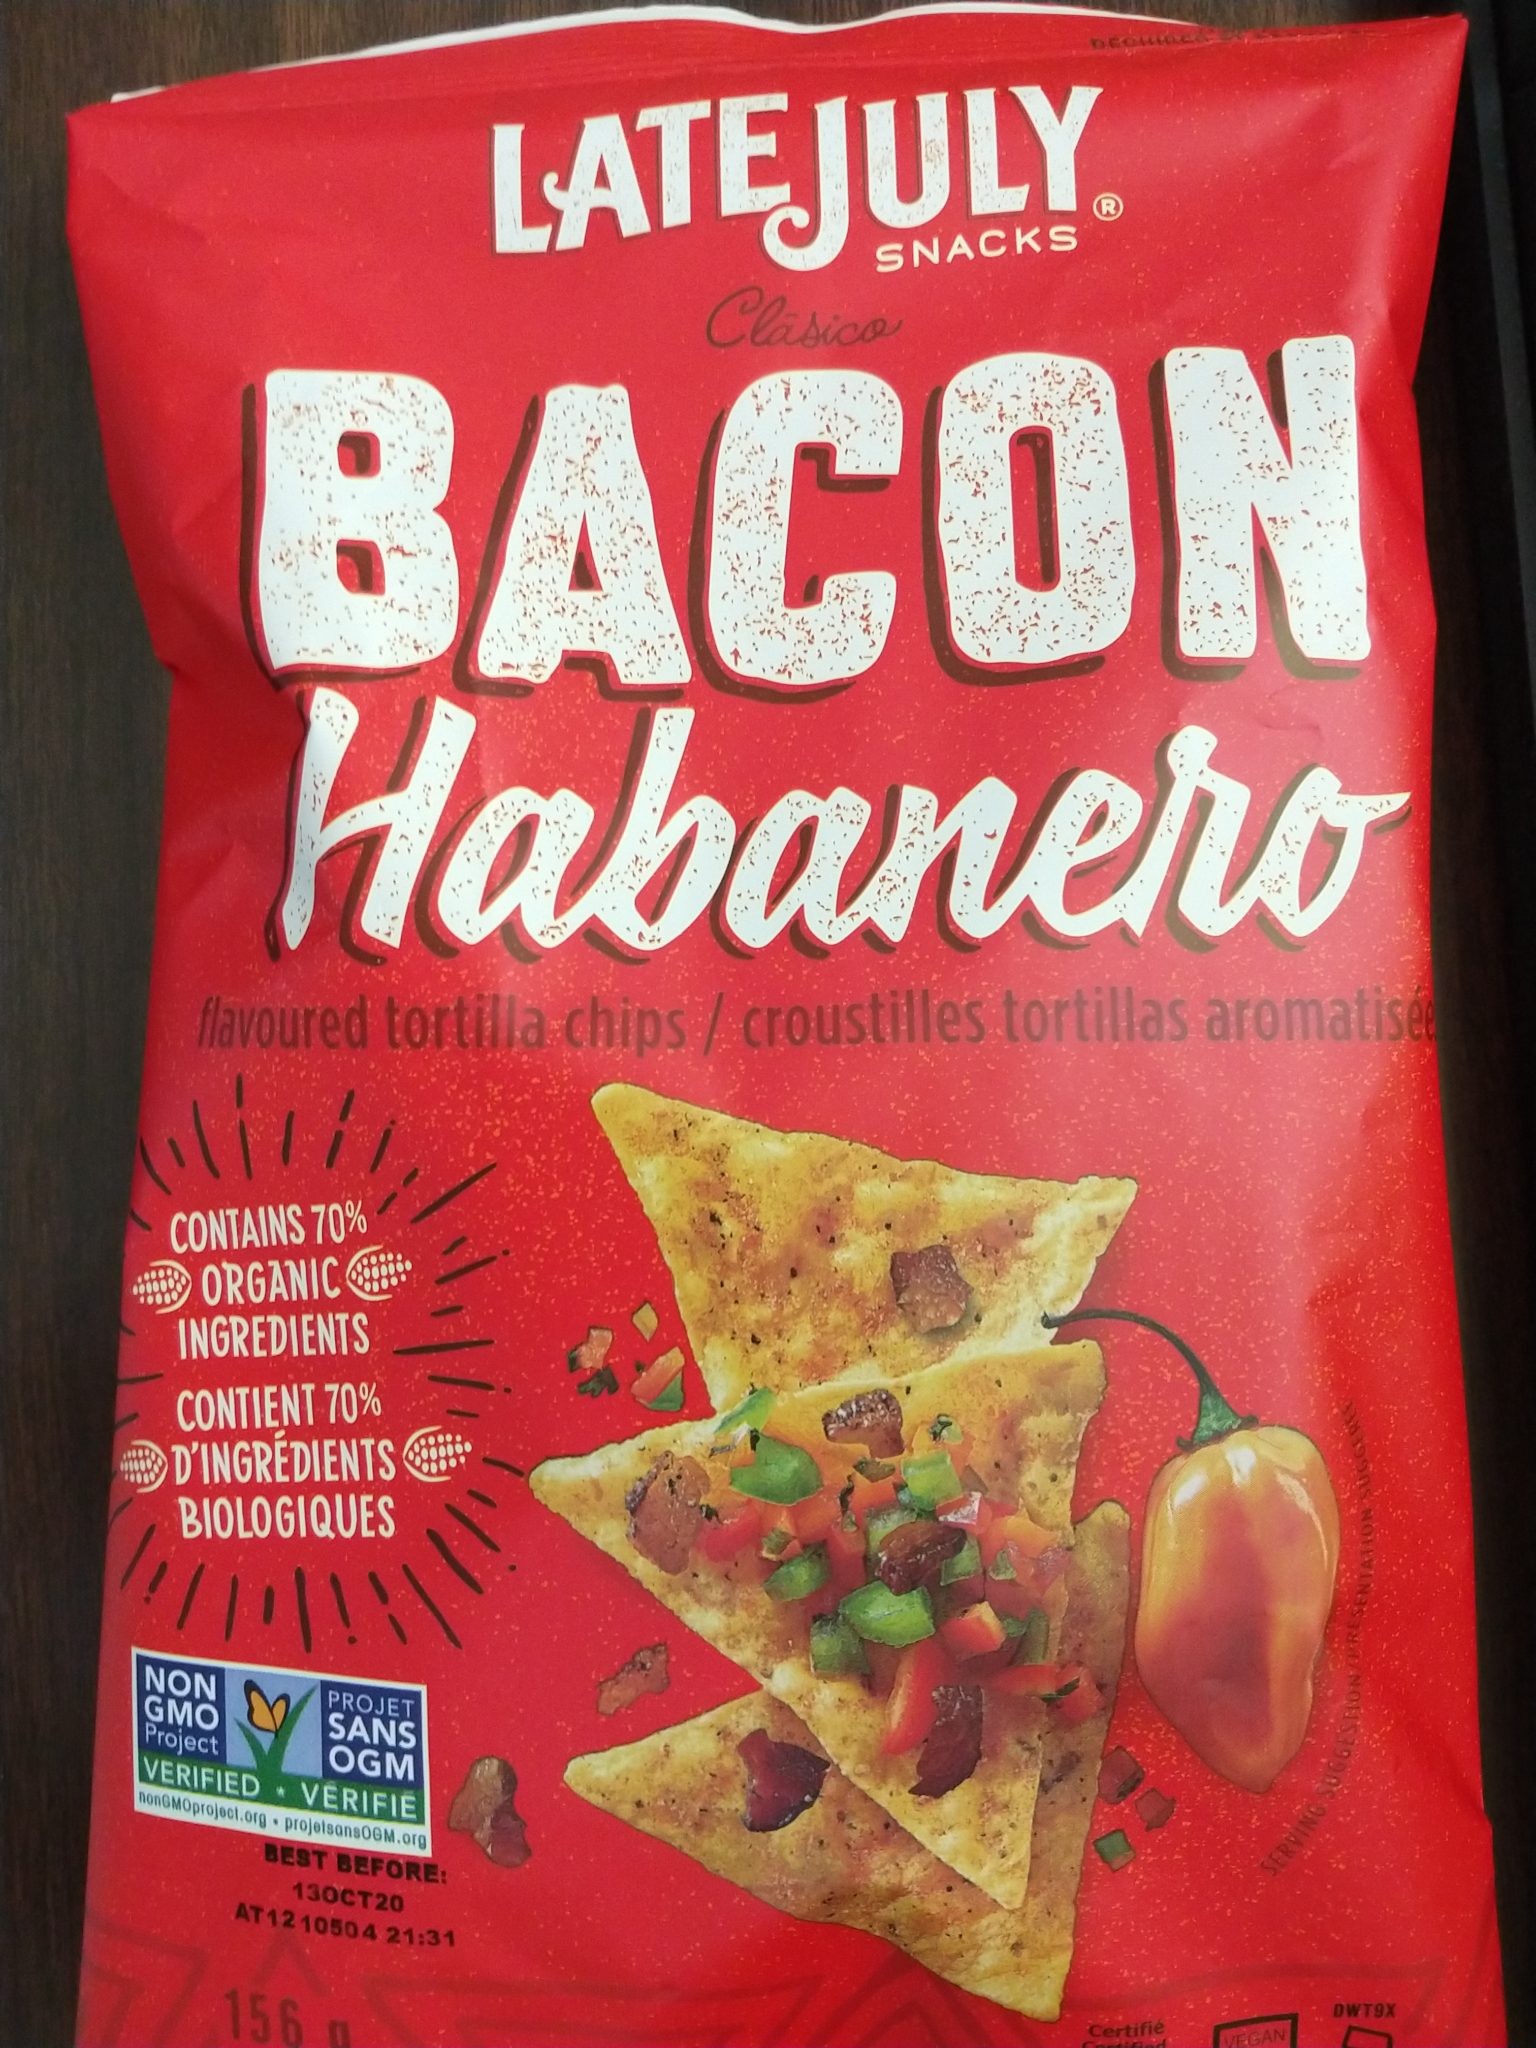 Late July Clasico Tortilla Chips – Bacon Habanero